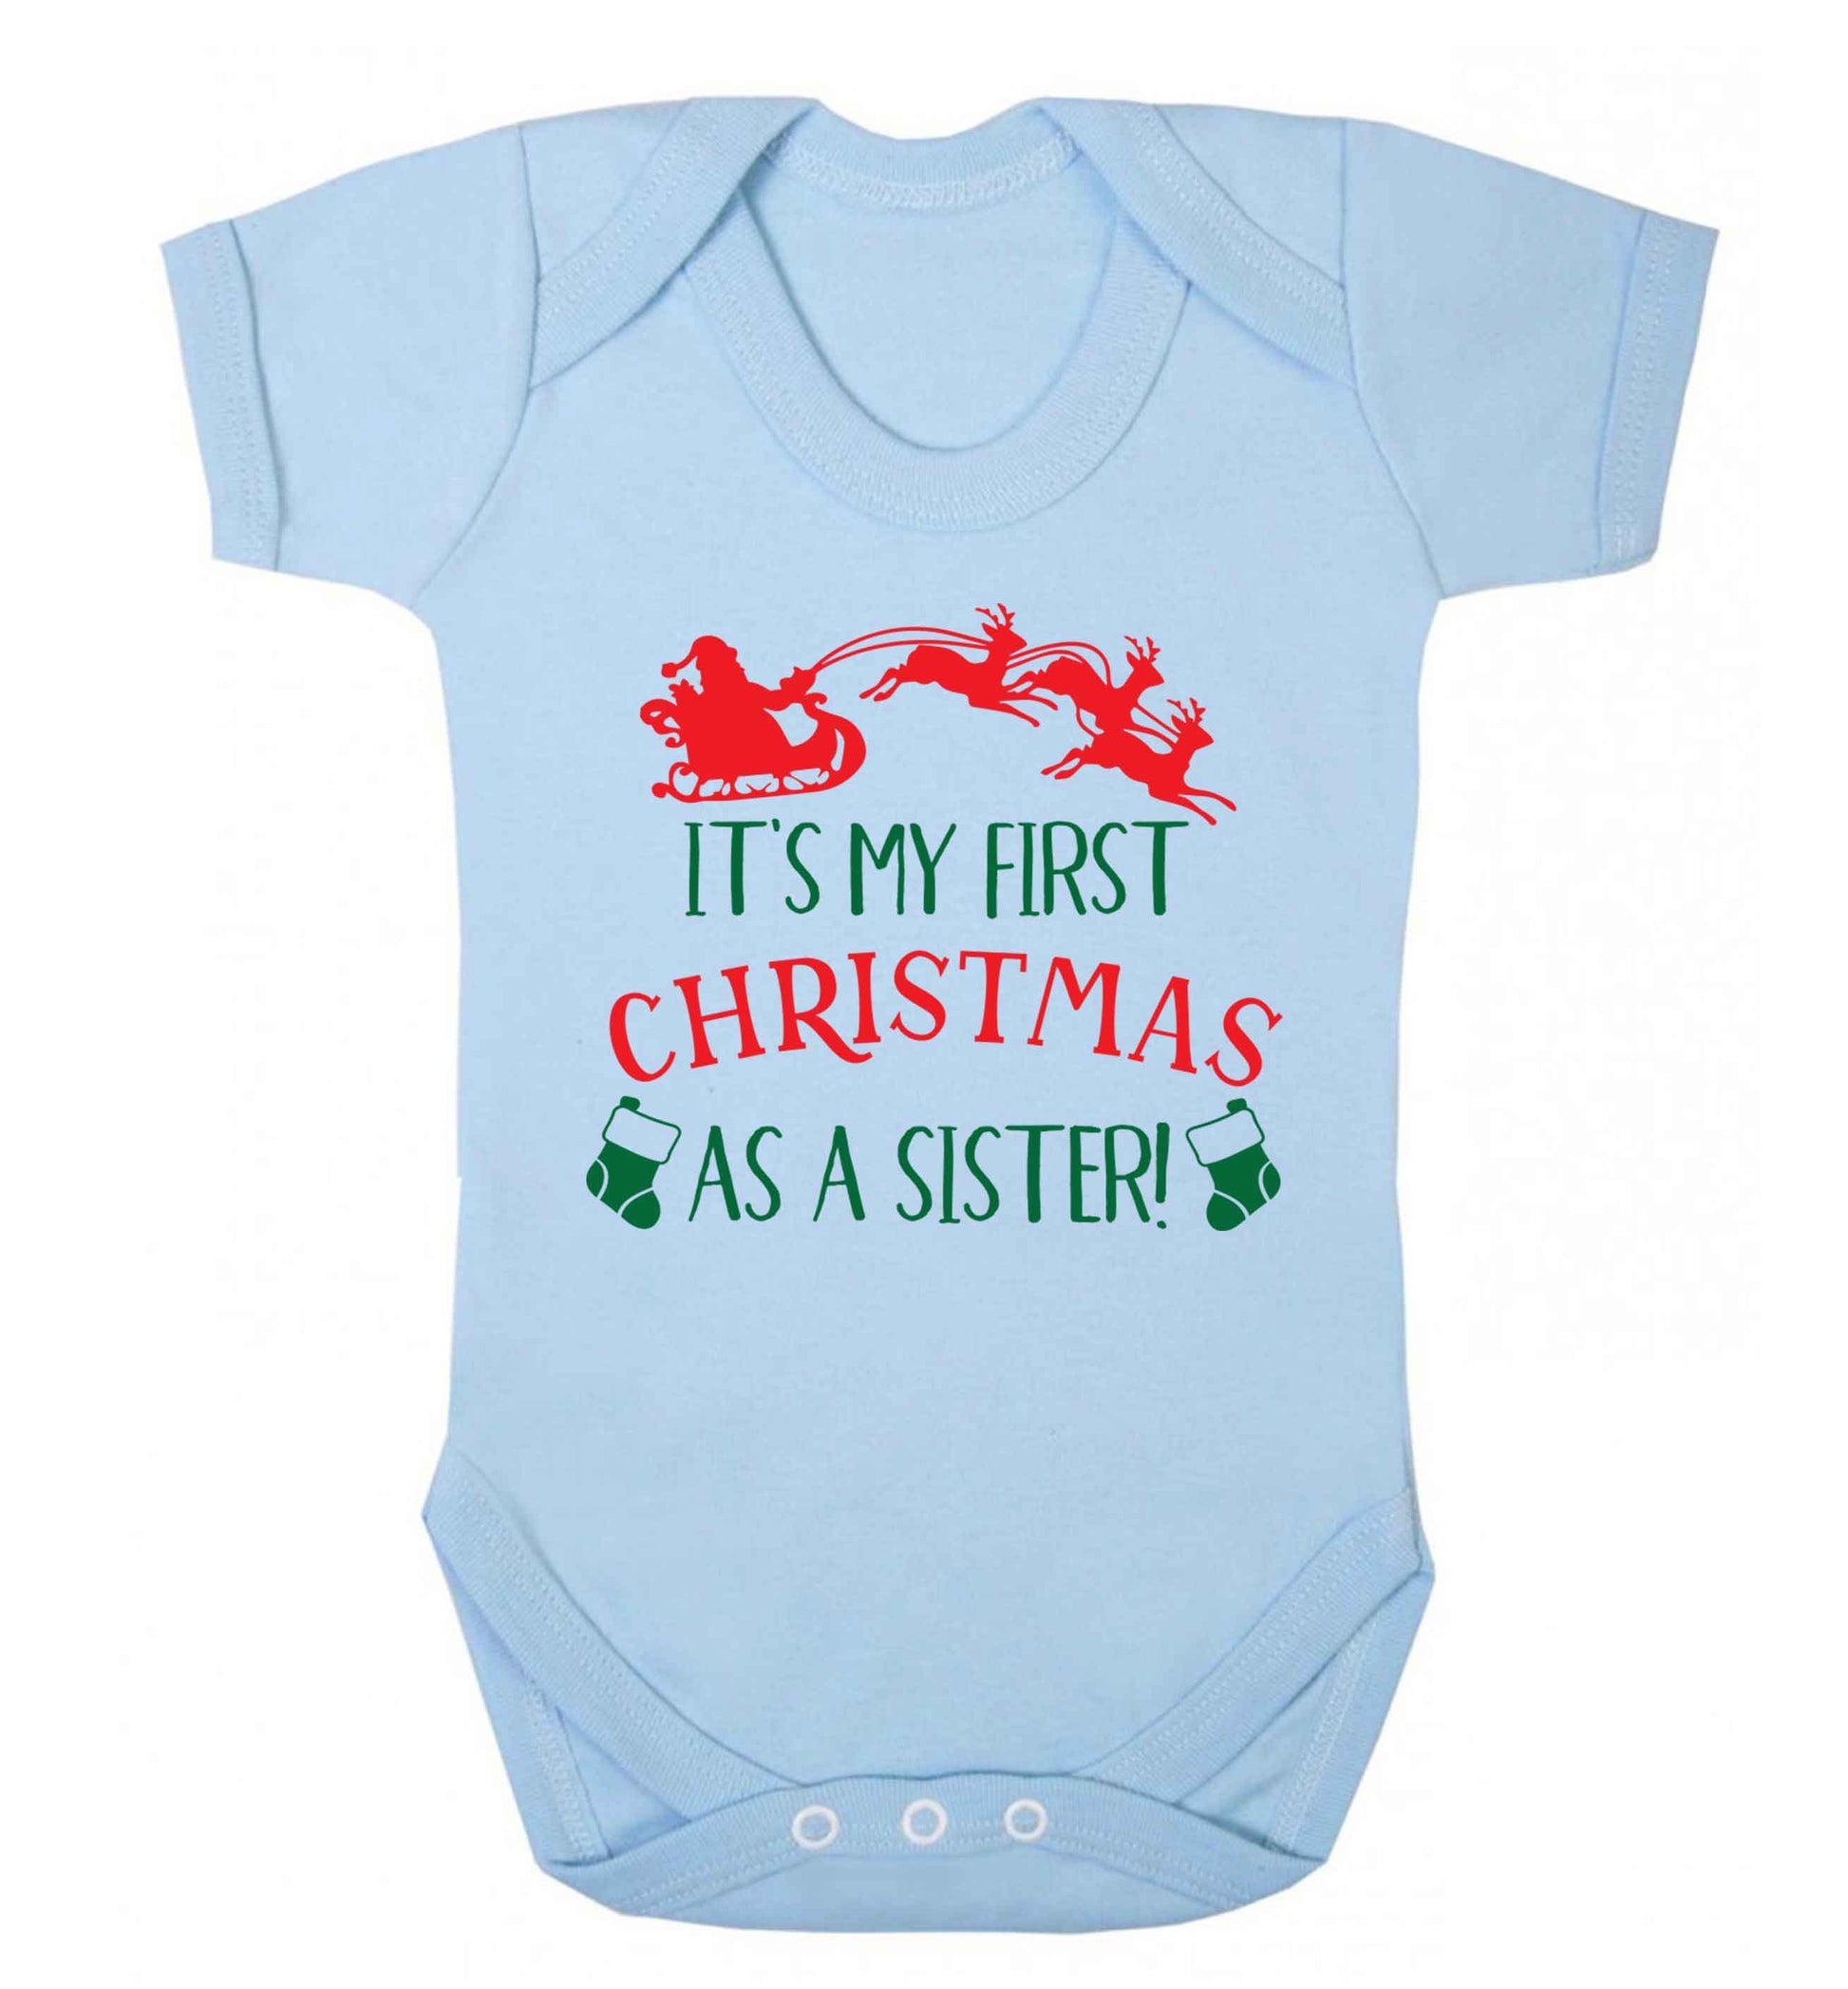 It's my first Christmas as a sister! Baby Vest pale blue 18-24 months